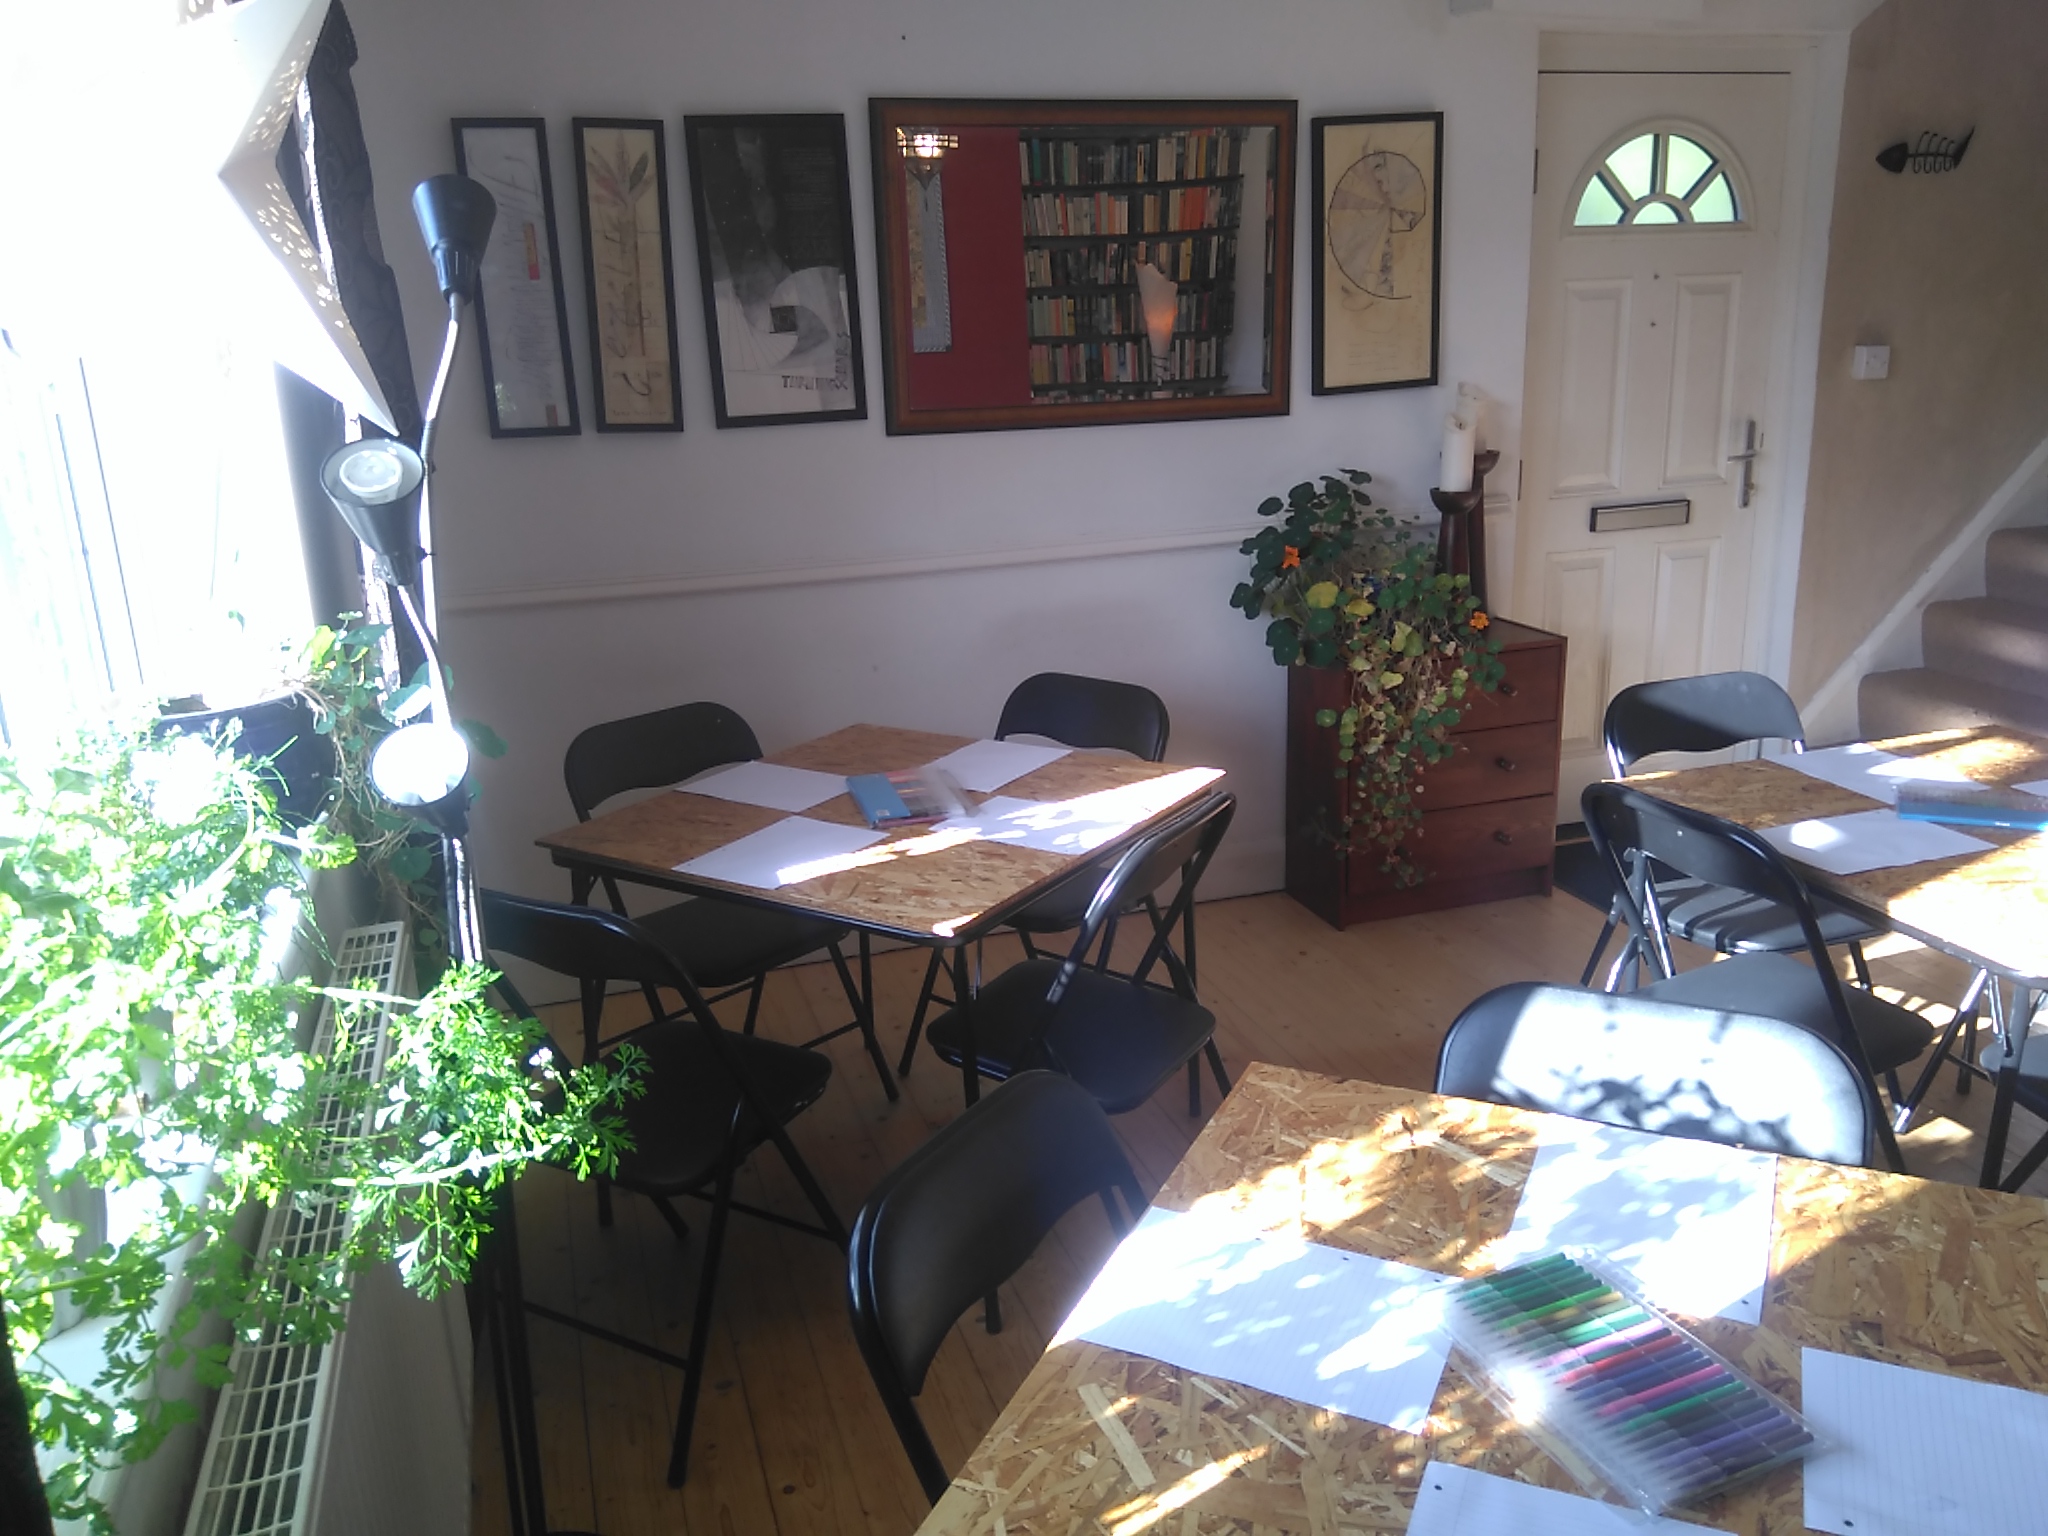 Tables, plants and paintings - the workshop space for summer workshops